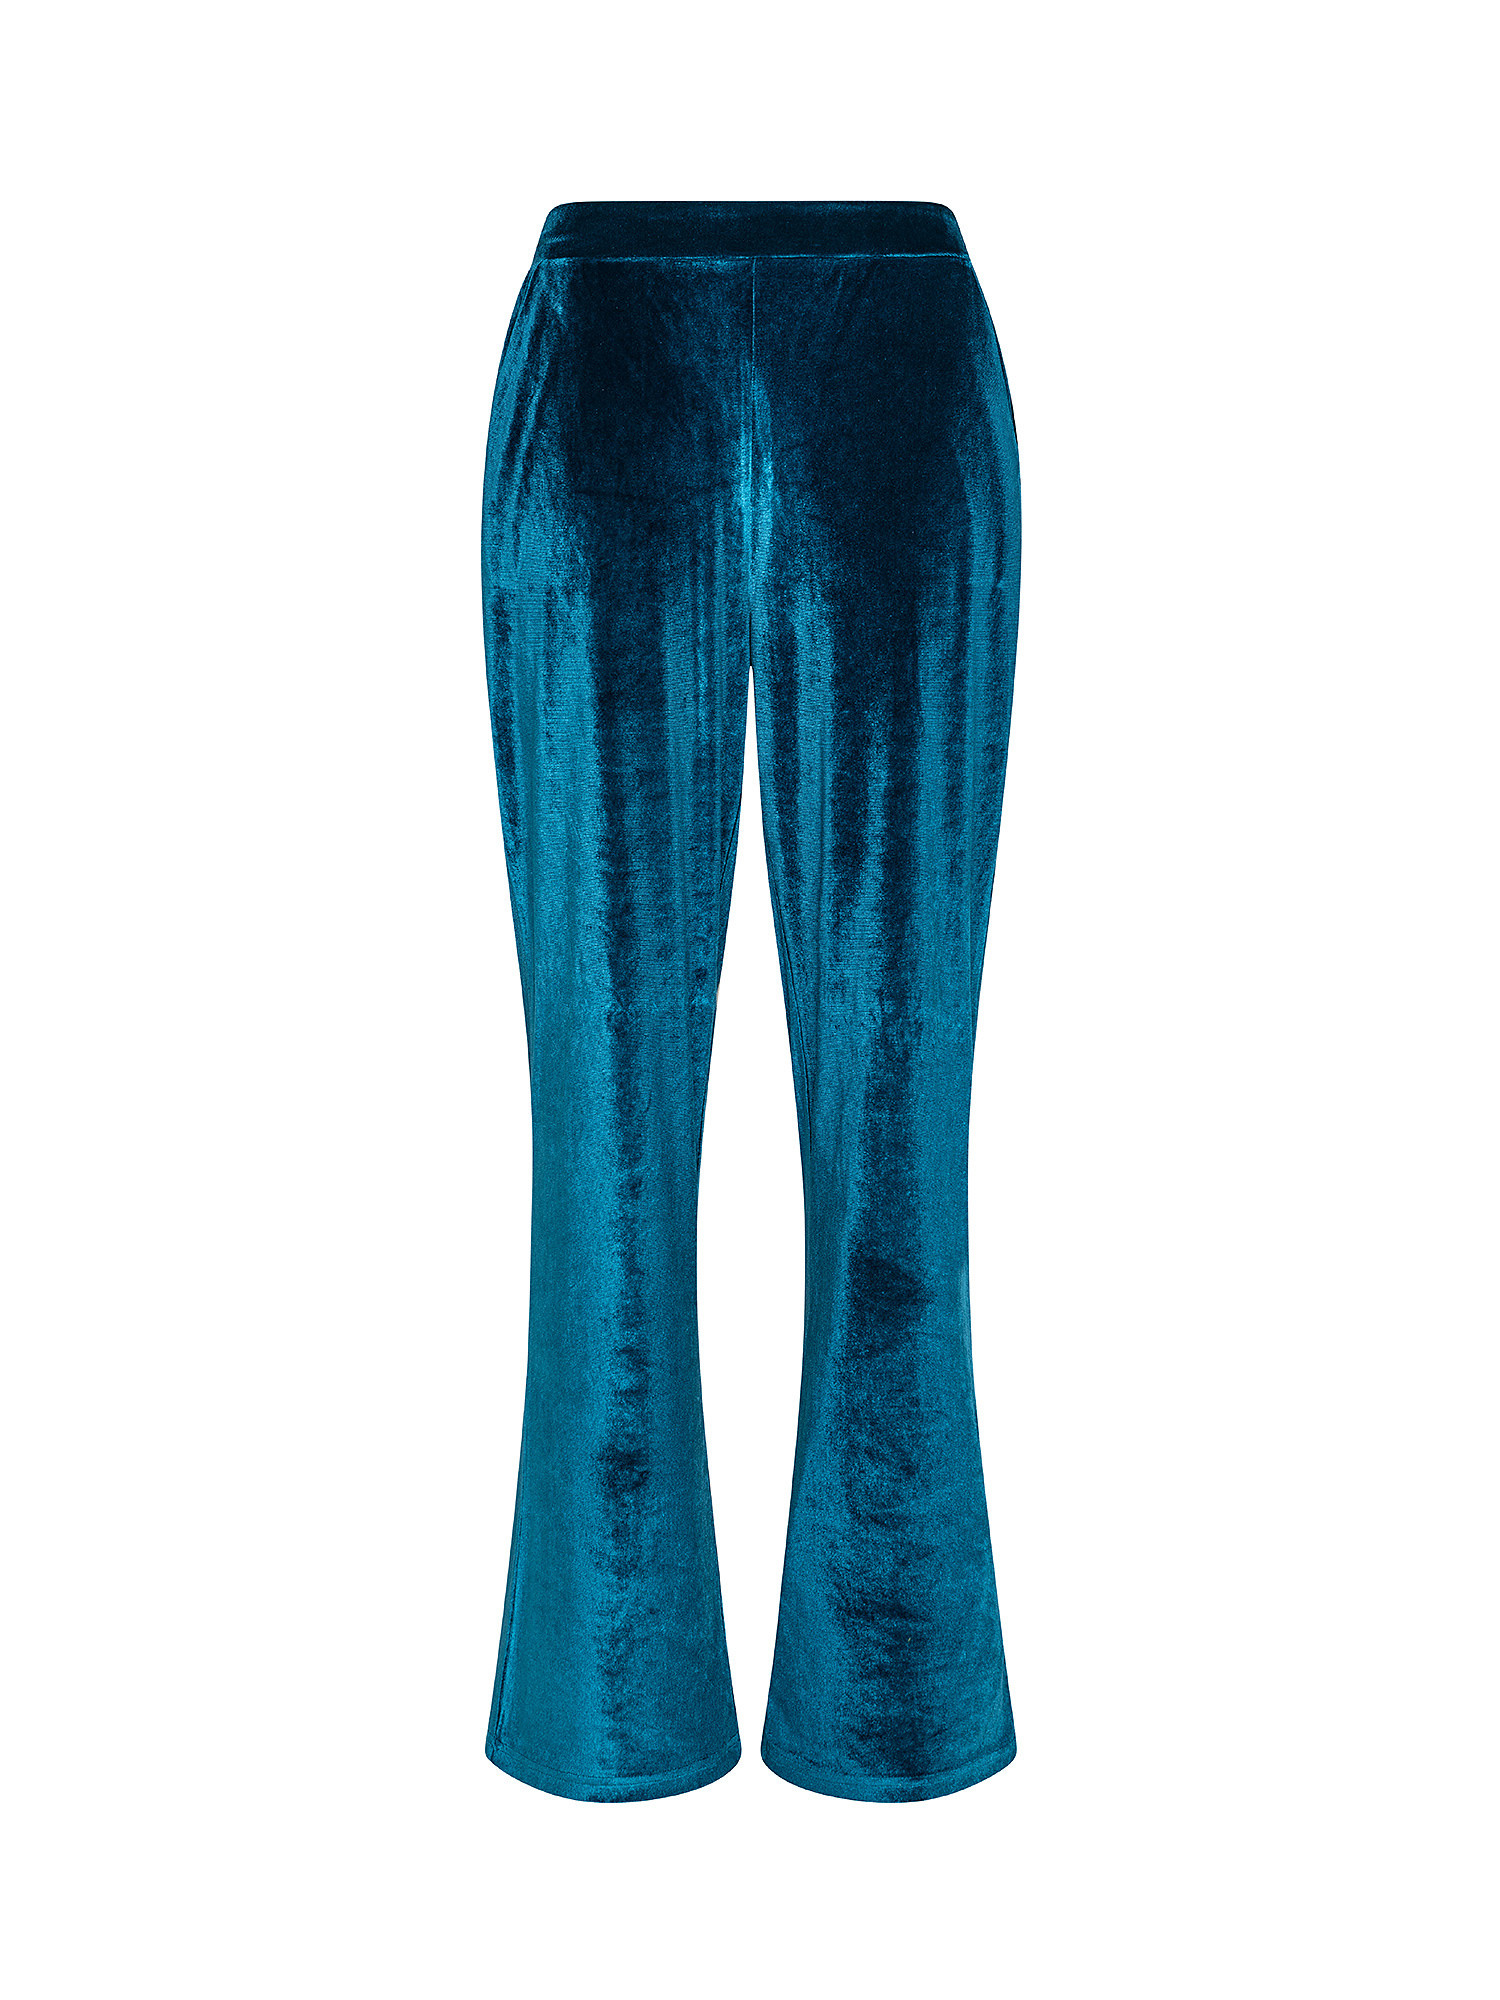 Velor trousers, Green teal, large image number 0